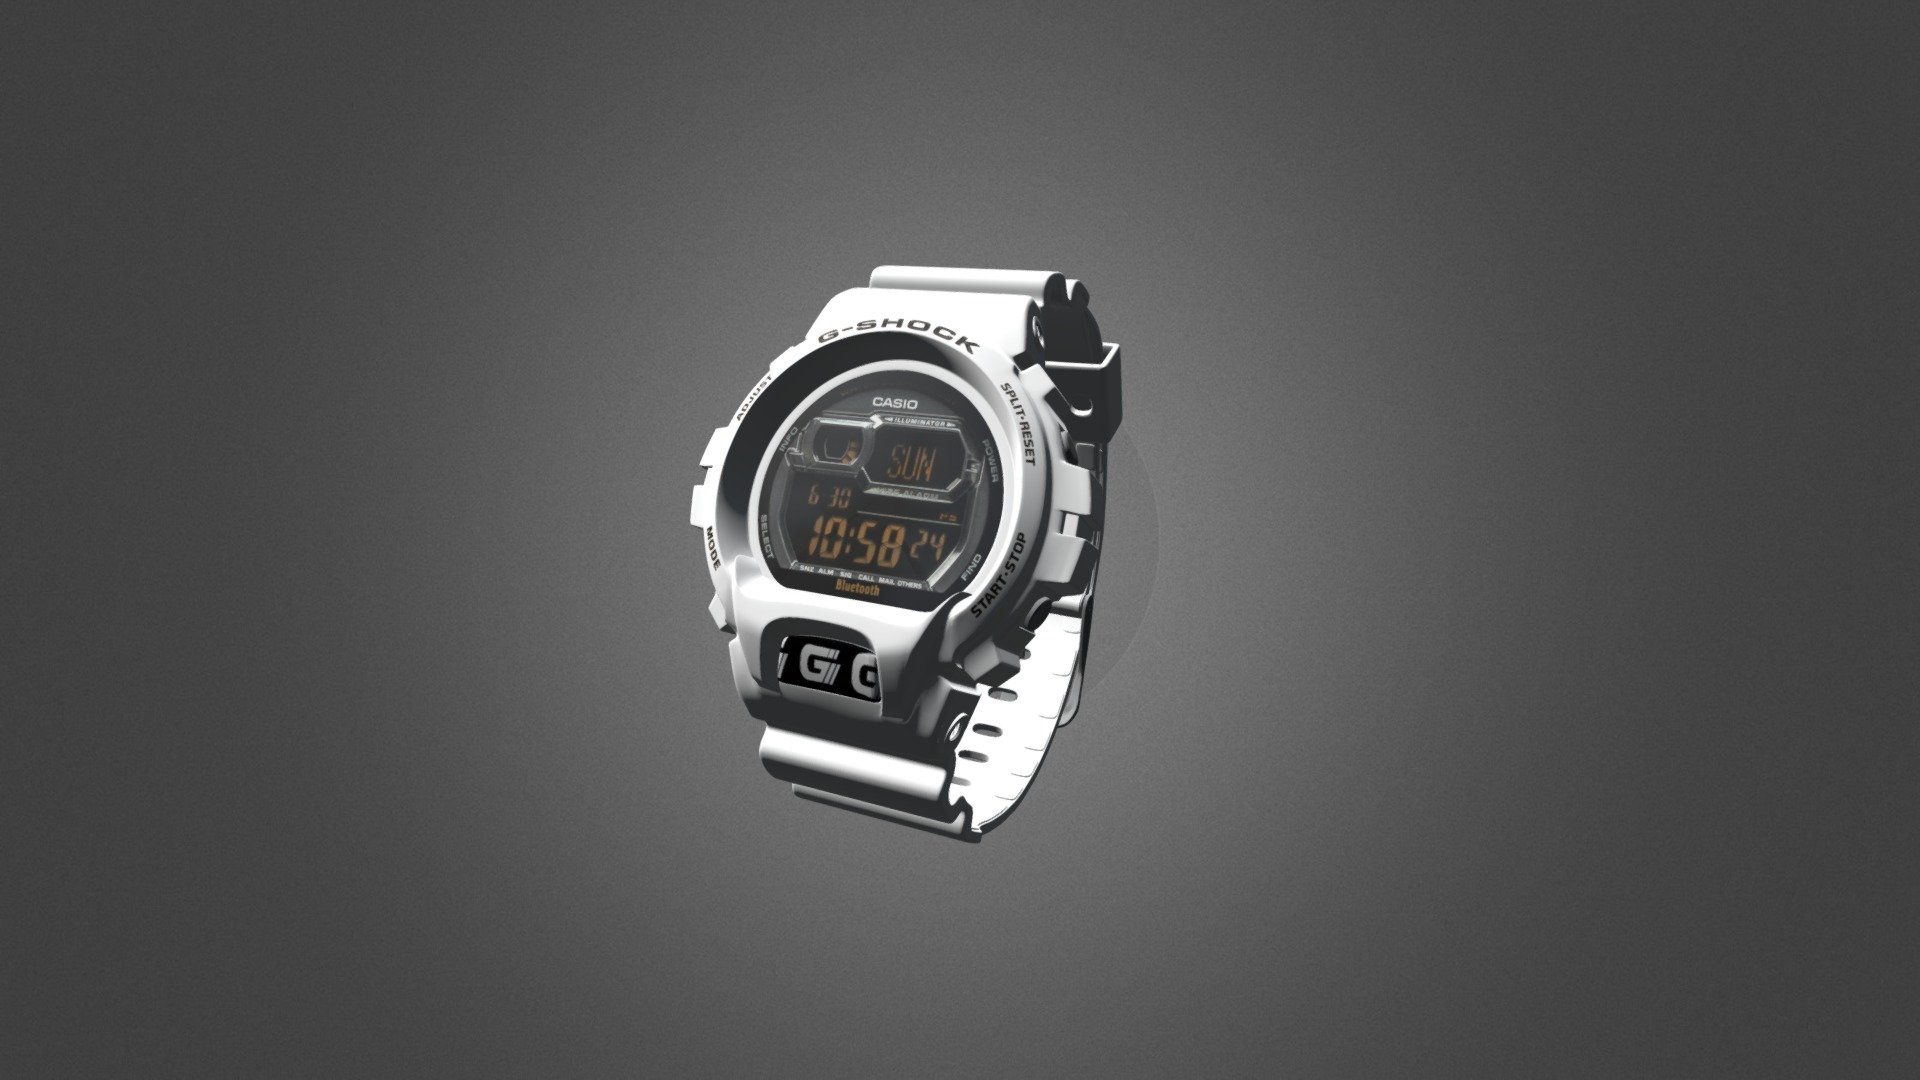 Test of the blender materials system with a Casio GB-6900B-7ER G-Shock Watch - Casio - GB-6900B-7ER - 3D model by switzerbaden 3d model